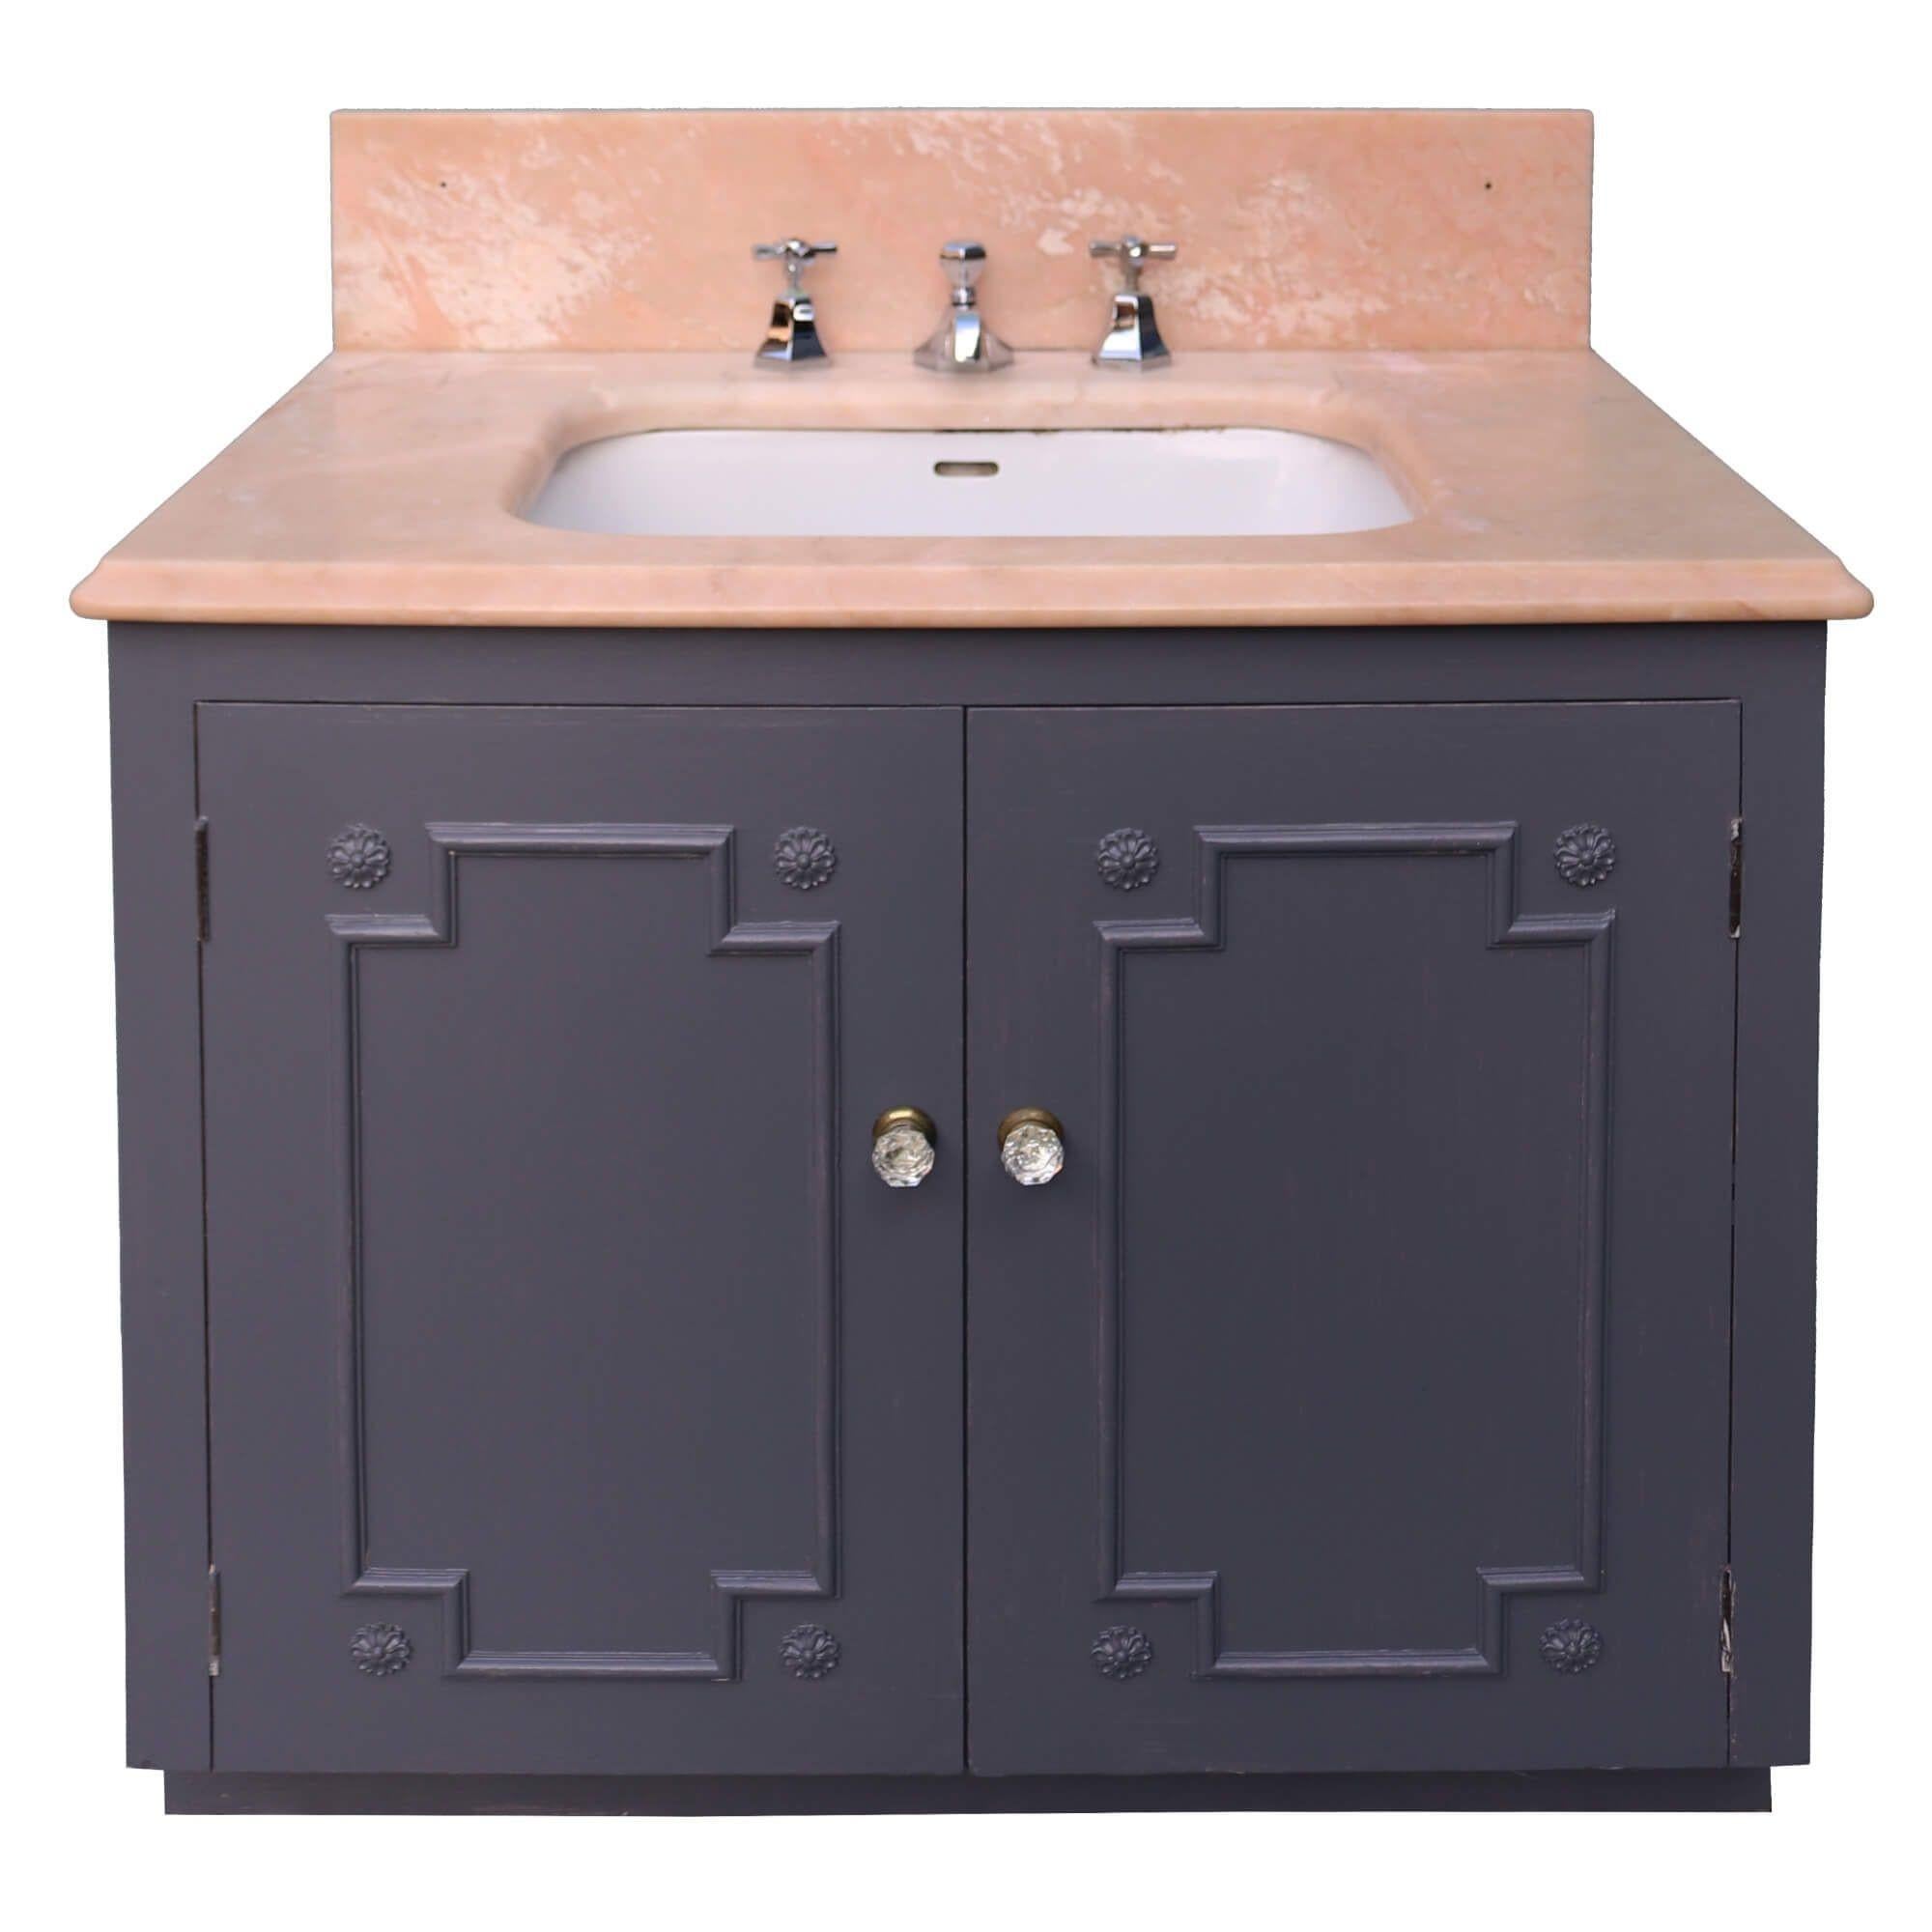 Reclaimed from a property in Haywards Heath near Brighton UK, this marble sink with cabinet is an impressive feature for a mid-century or Art Deco style bathroom. It comprises of a 1950s peach veined marble sink by John Bolding and Sons – 19th and